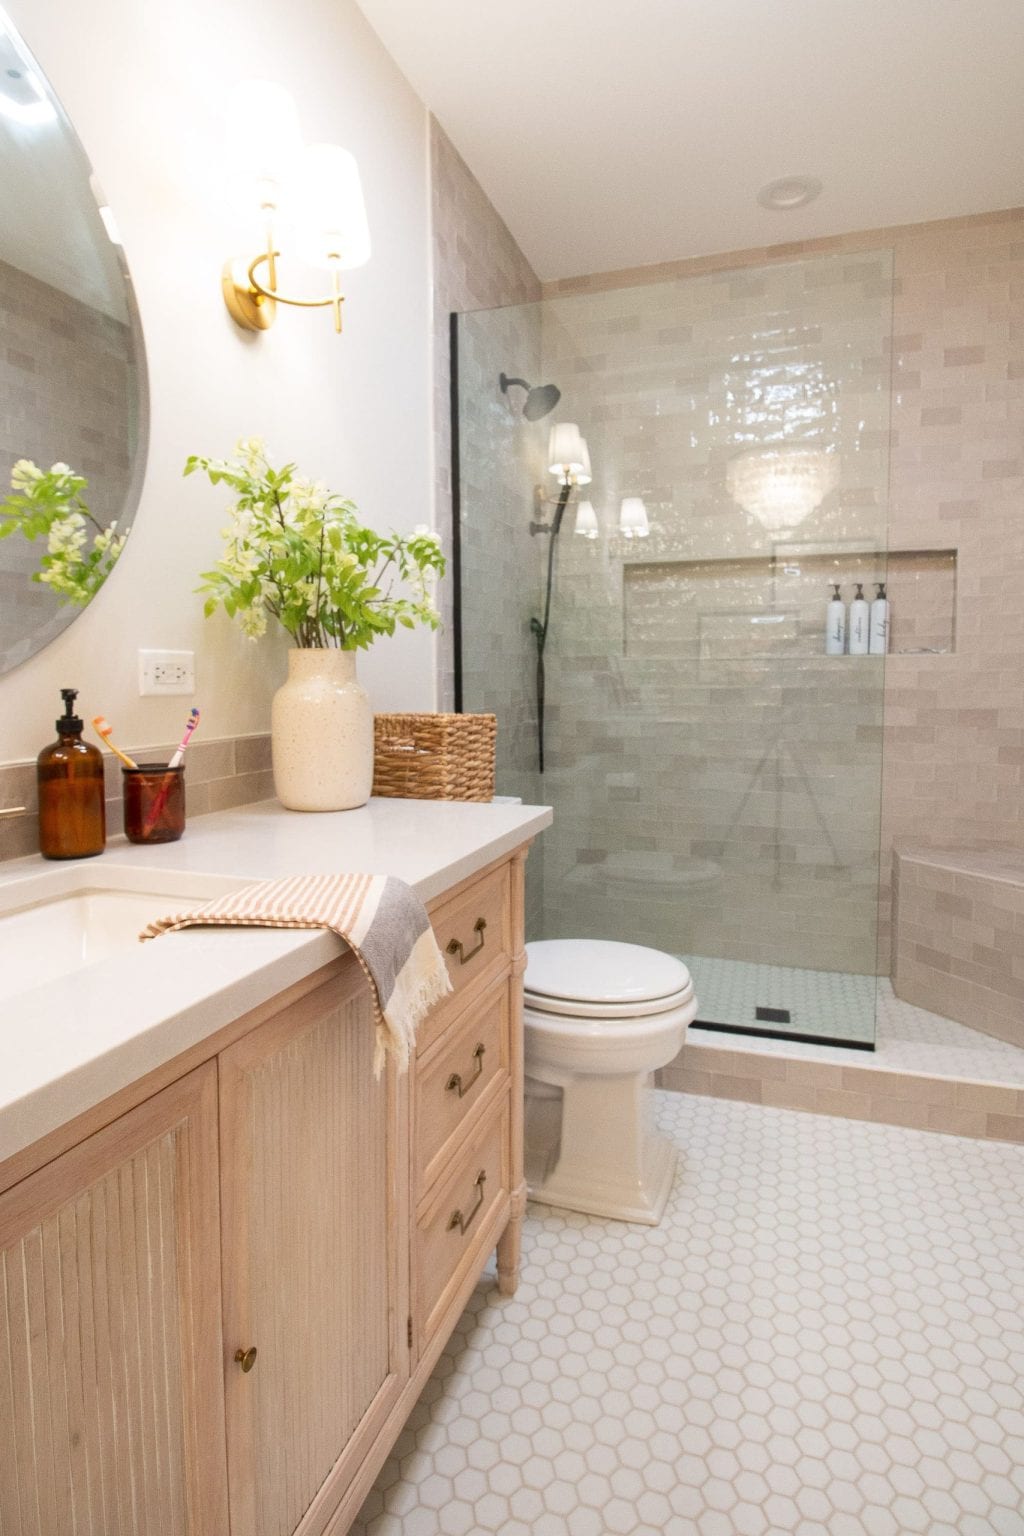 Main bathroom features to add to your home